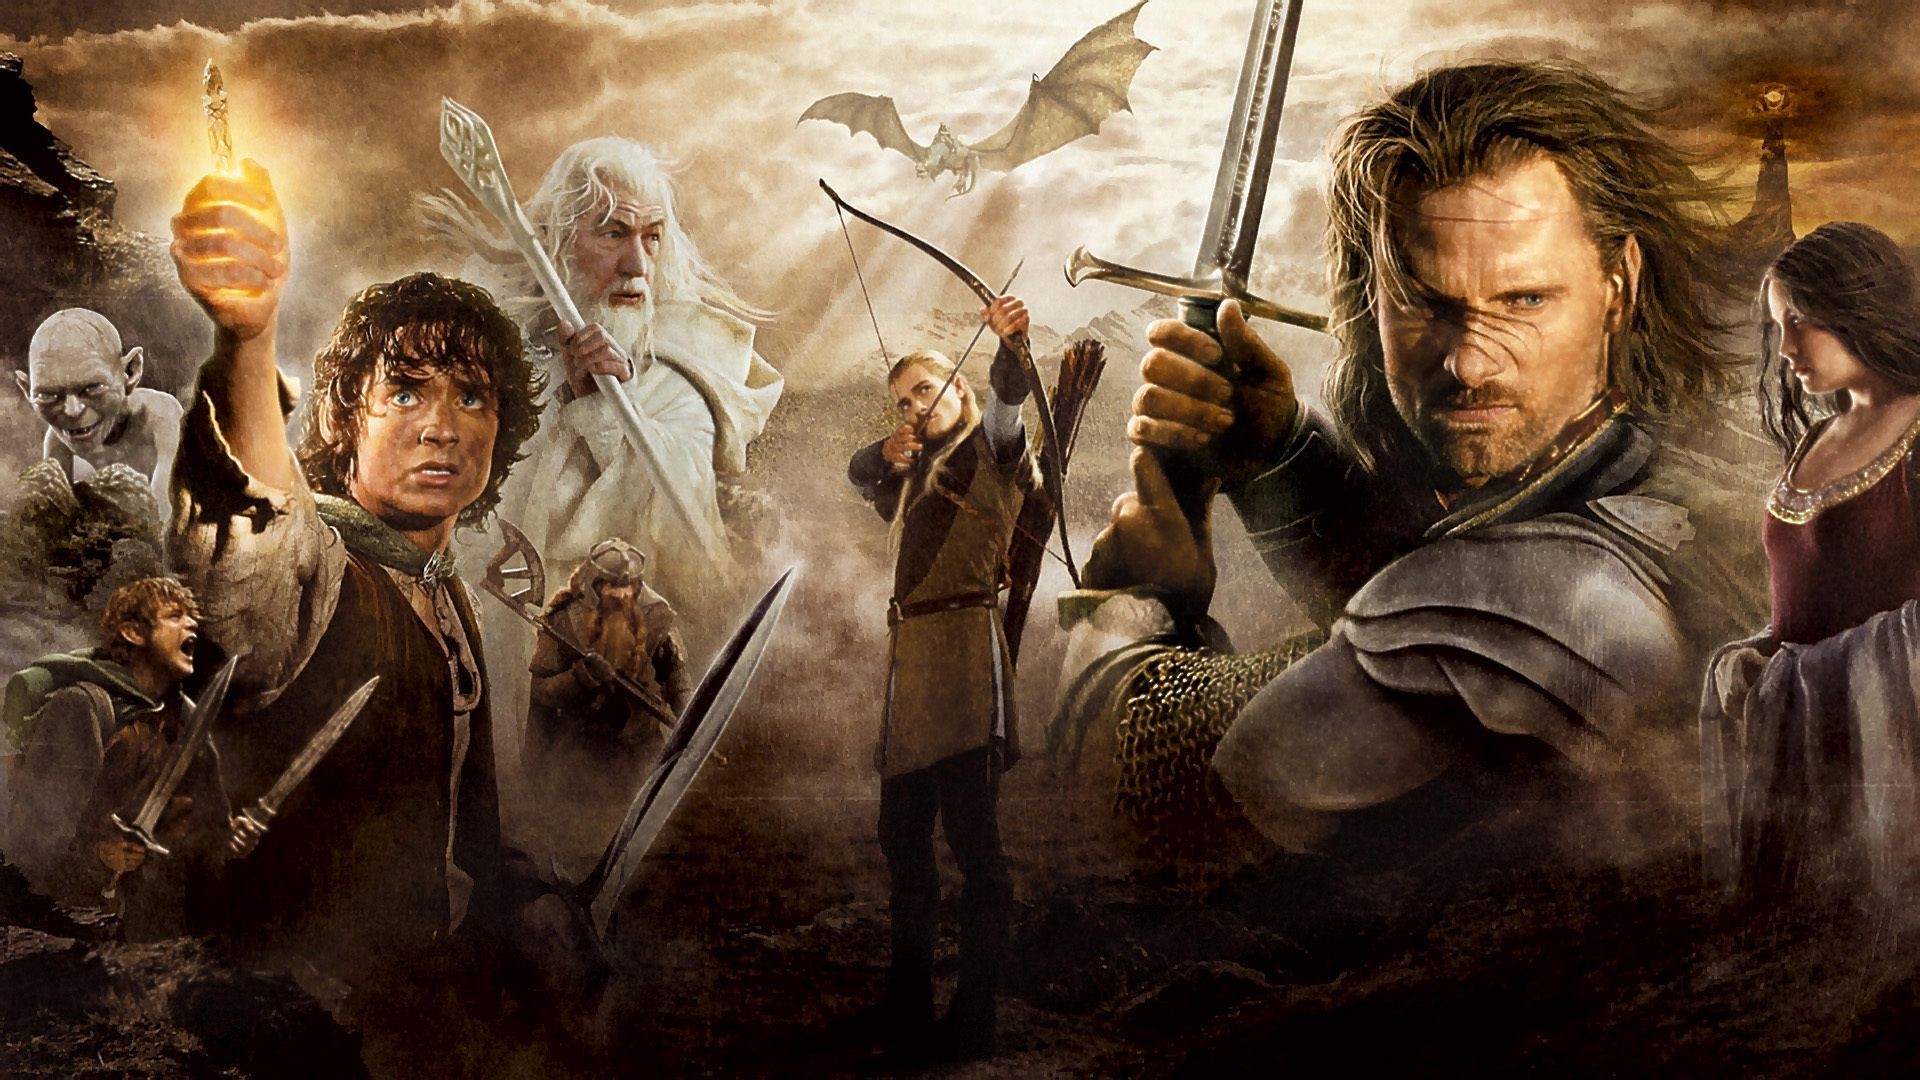 1920x1080 Lord Of The Rings Wallpaper Quotes png x desktop wallpaper 224540